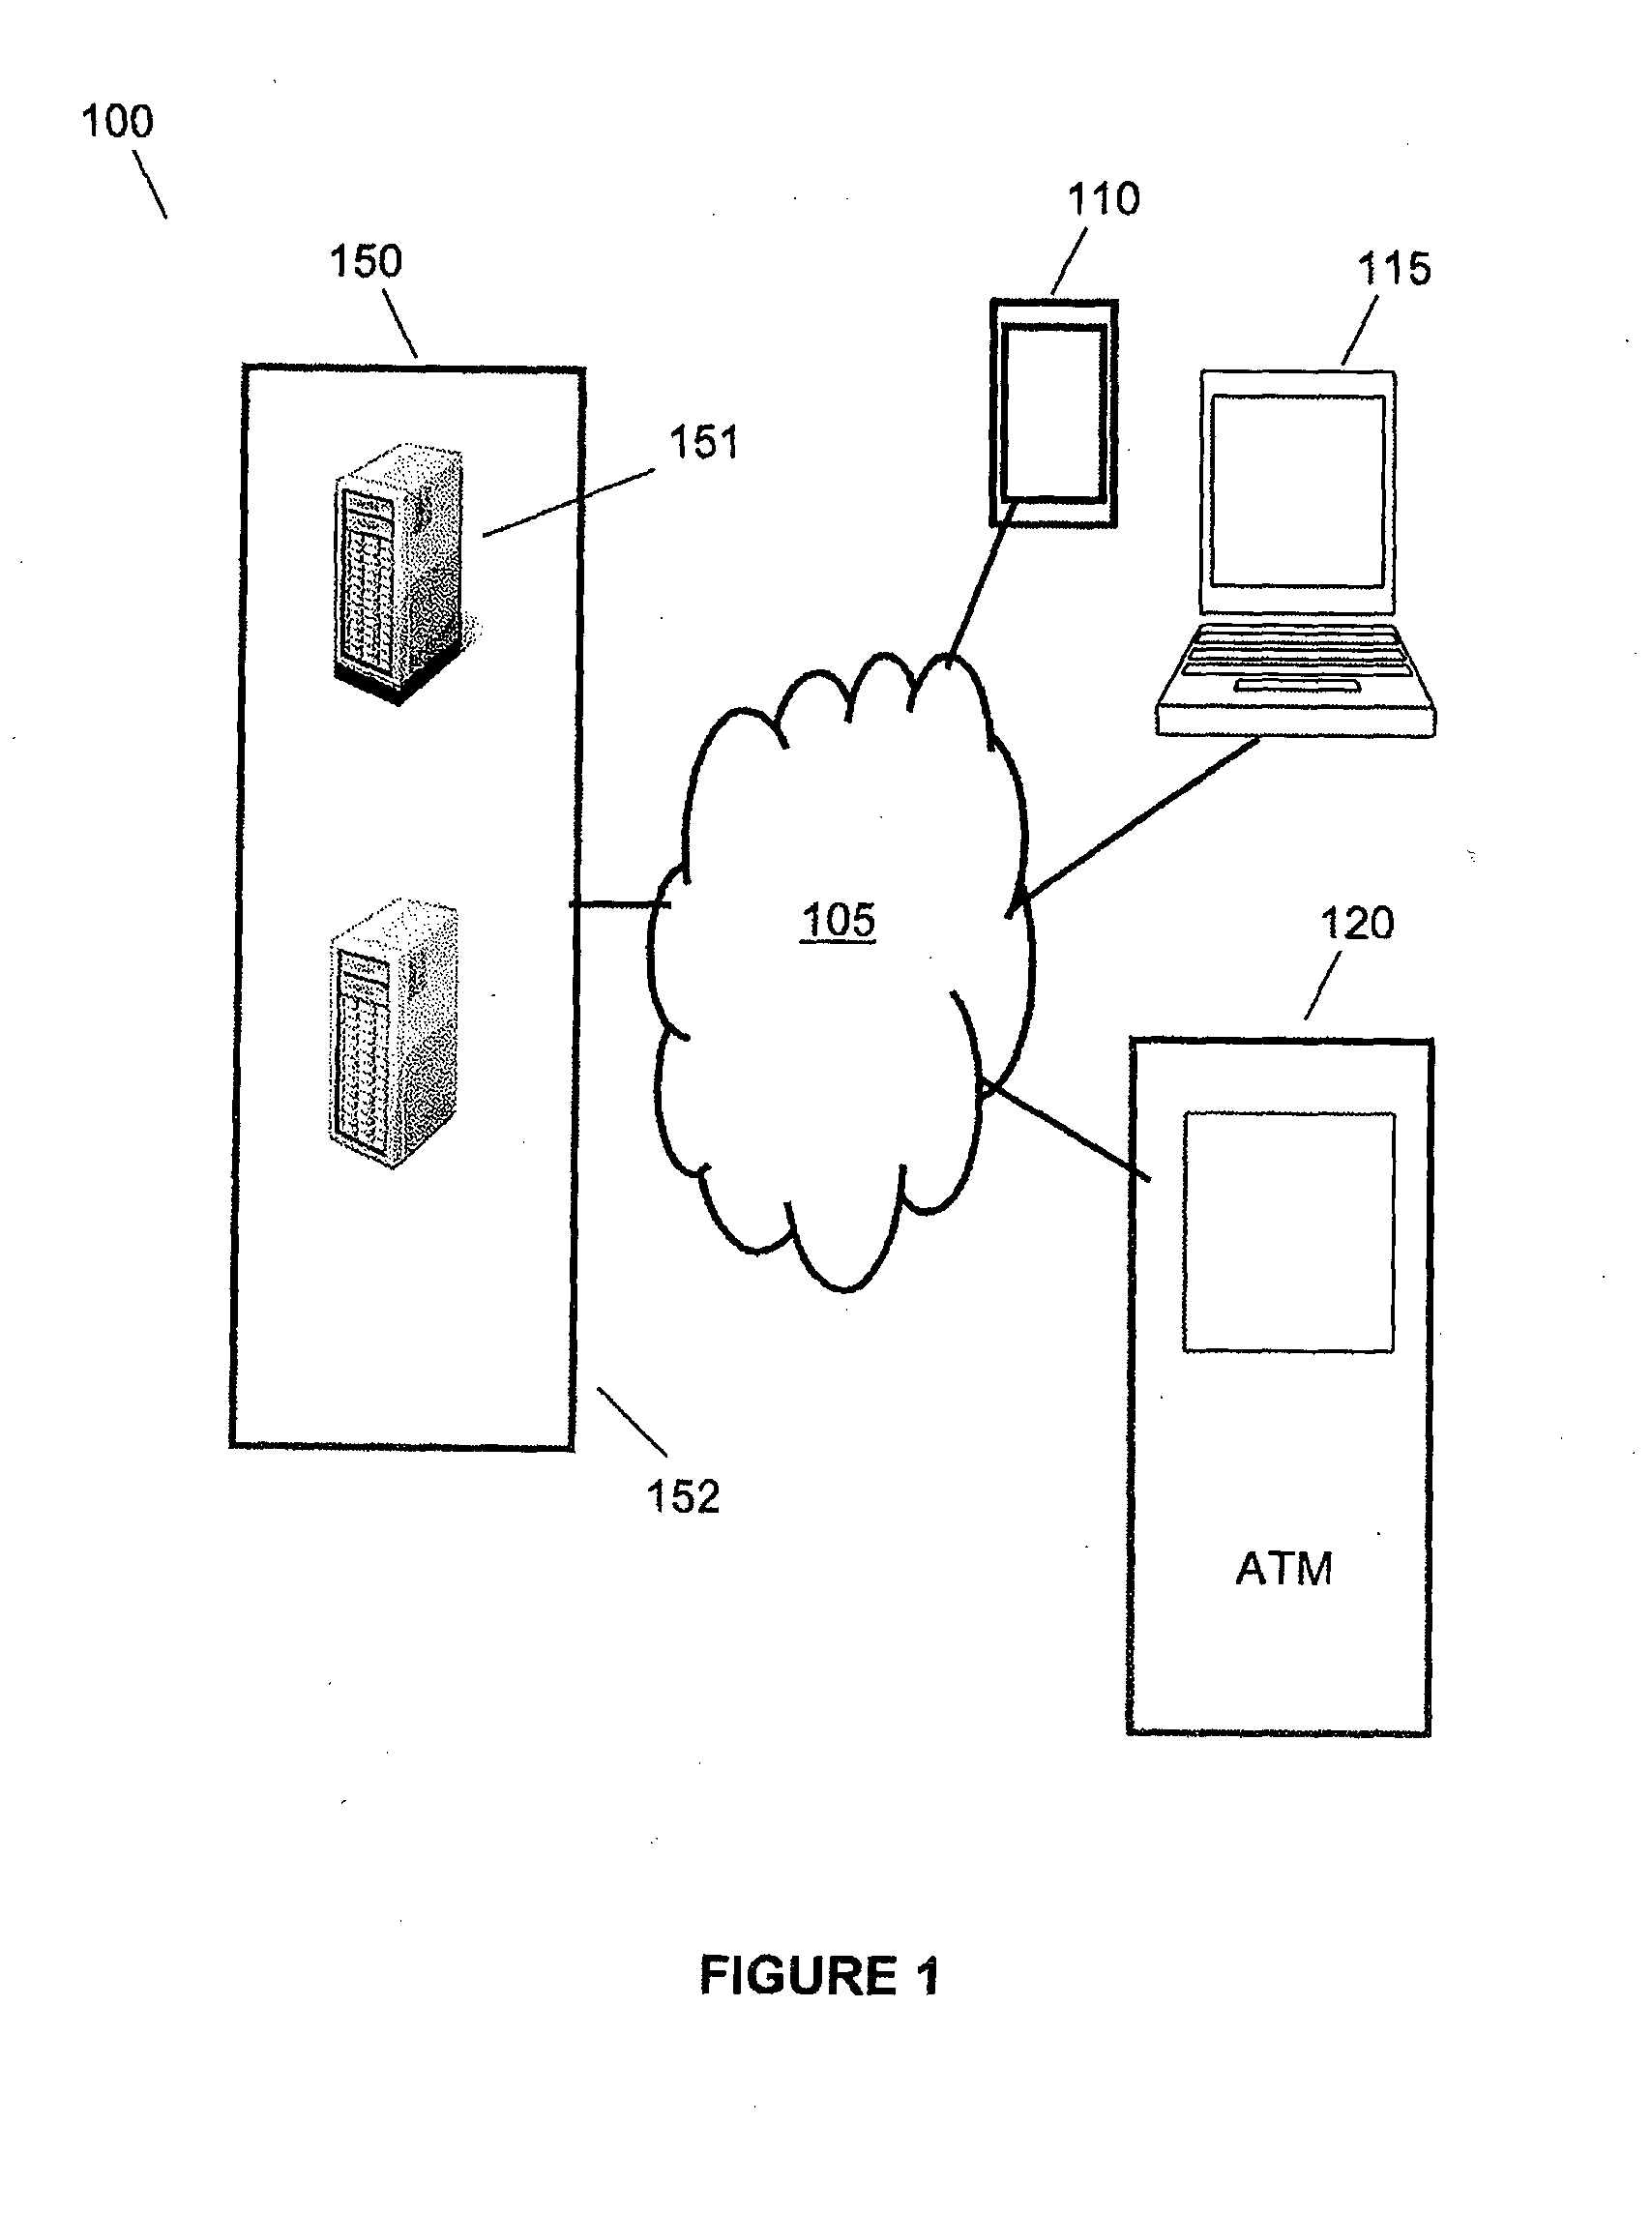 Method and System for Protecting a Password During an Authentication Process